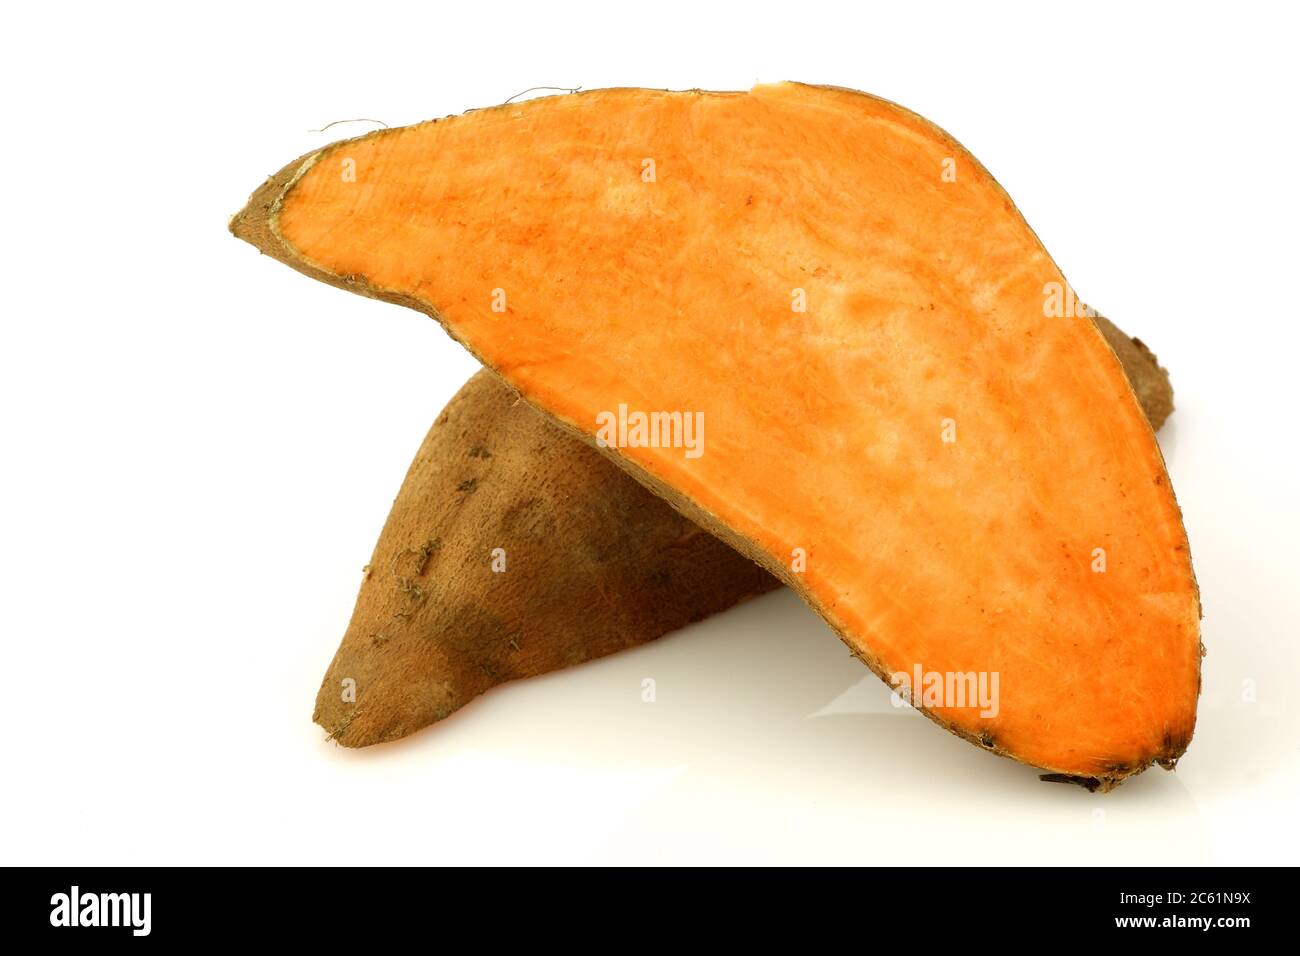 cut sweet potatoes on a white background Stock Photo